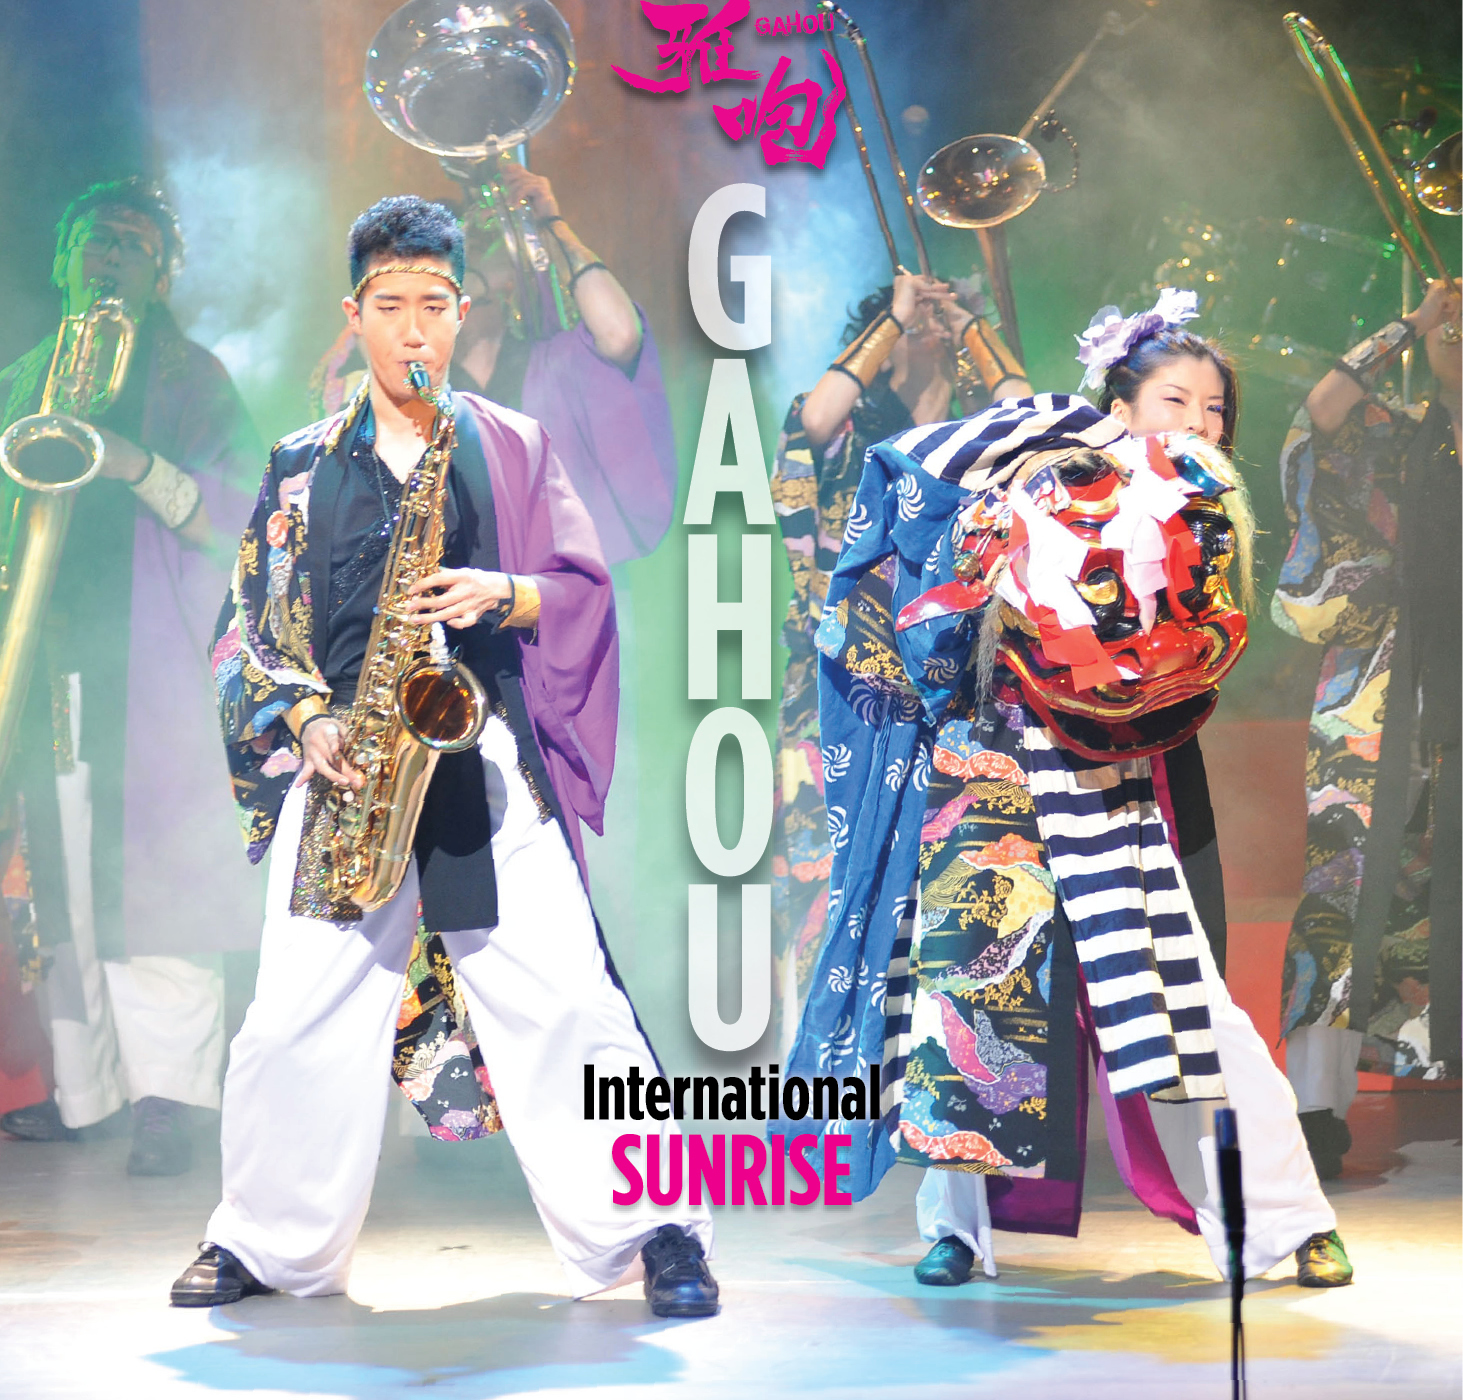 Gahou International: Sunrise (from the Crazy Angel Company in Japan)